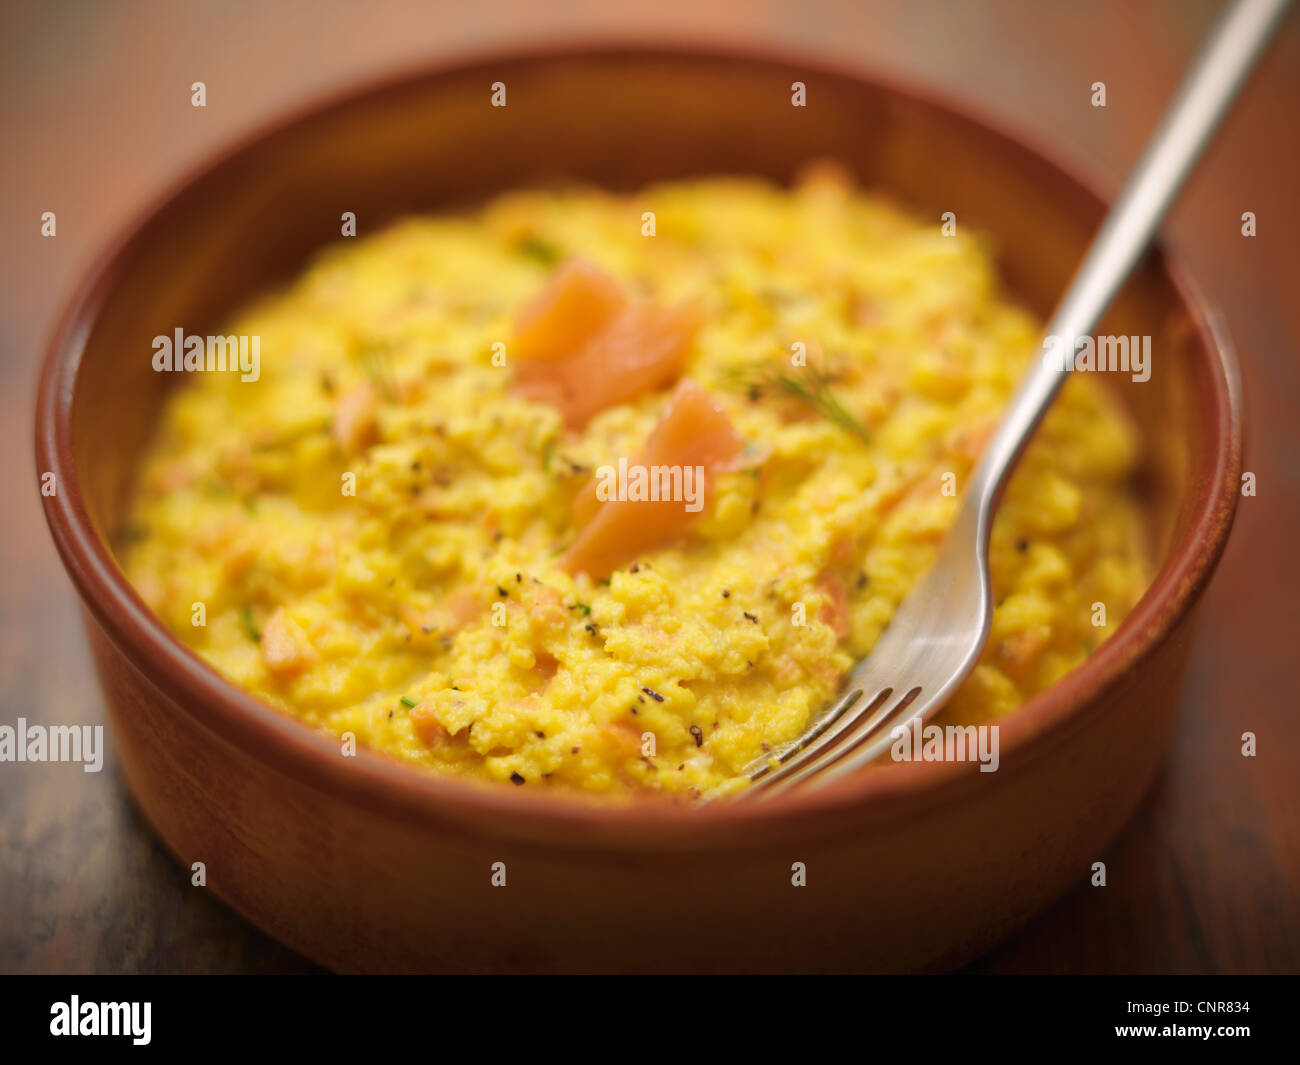 Bowl of scrambled eggs and salmon Stock Photo